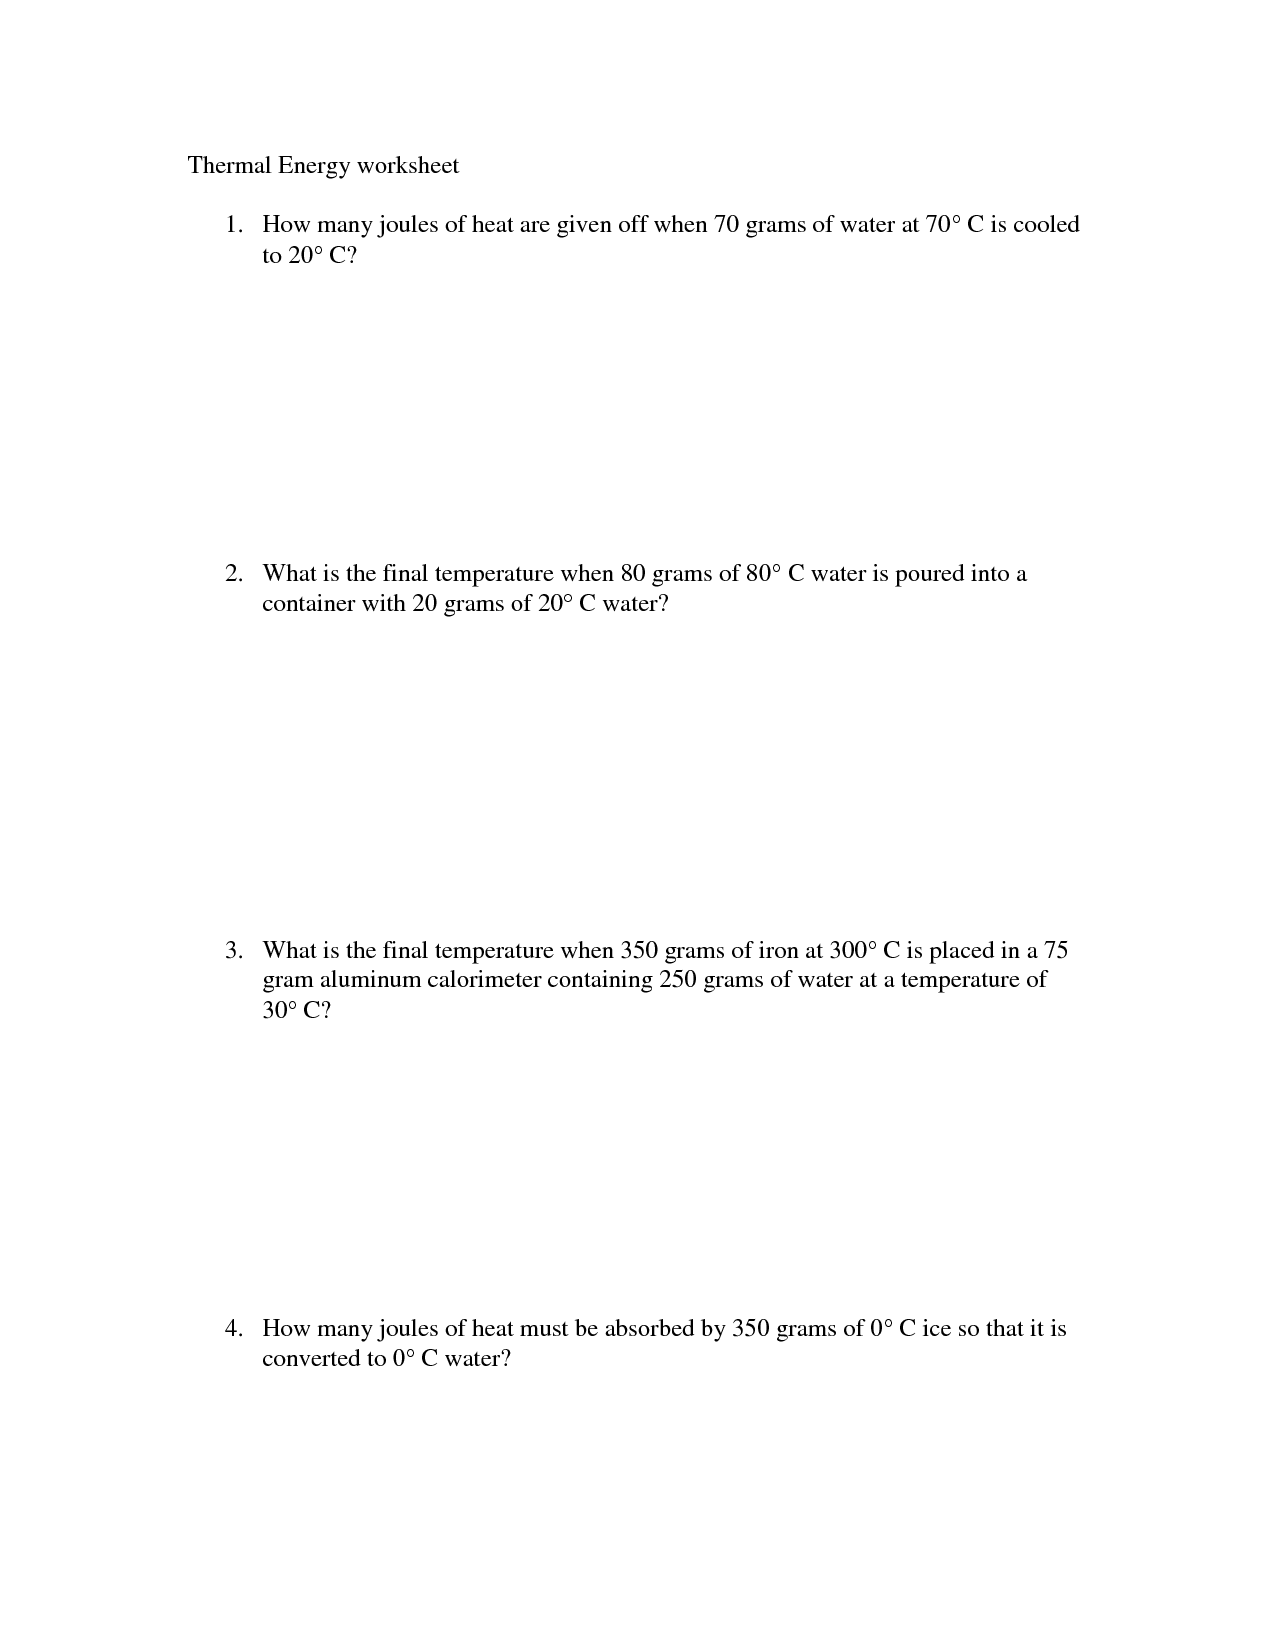 Heat and Thermal Energy Worksheet Image